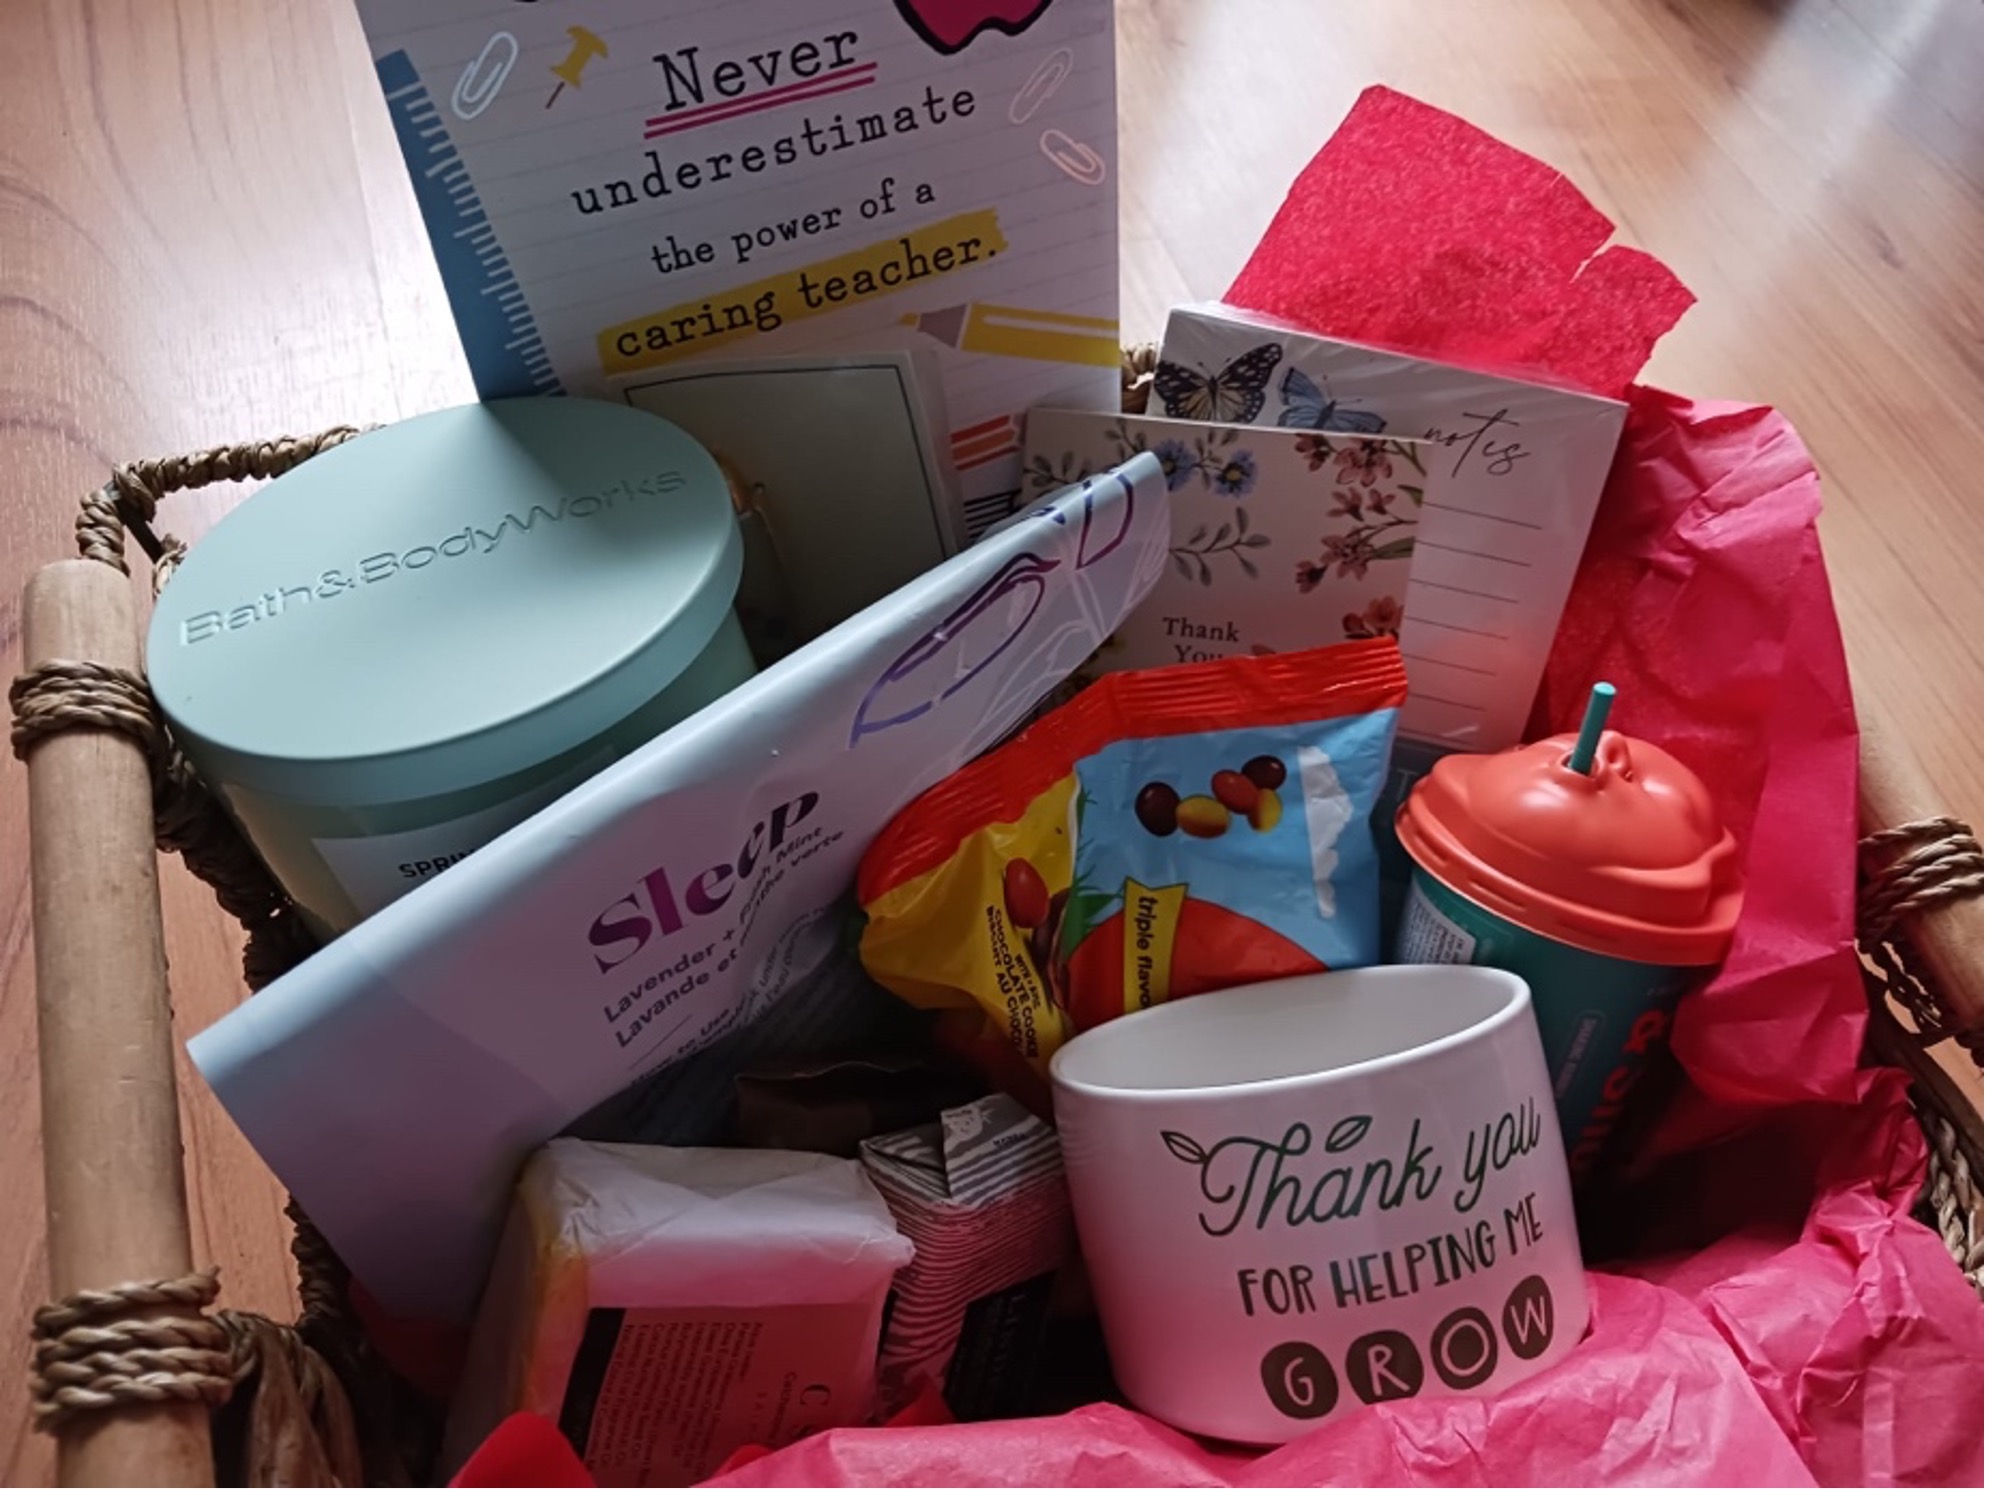 The care basket that Melanie received from her students